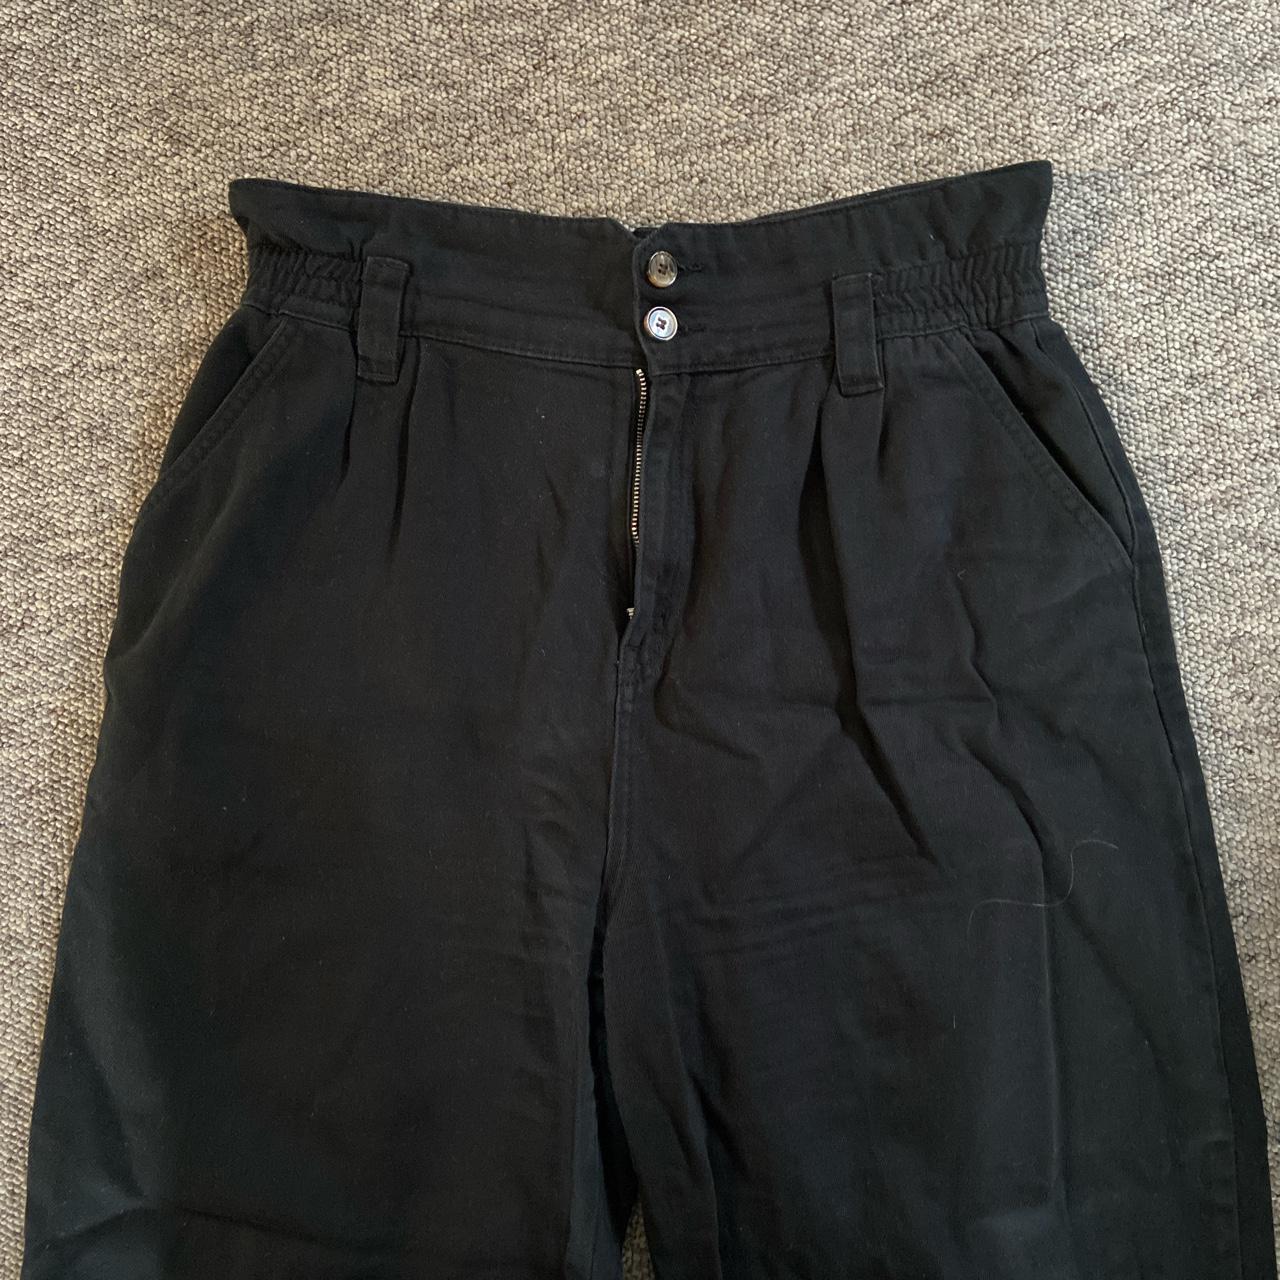 Urban Outfitters Women's Black Trousers (2)